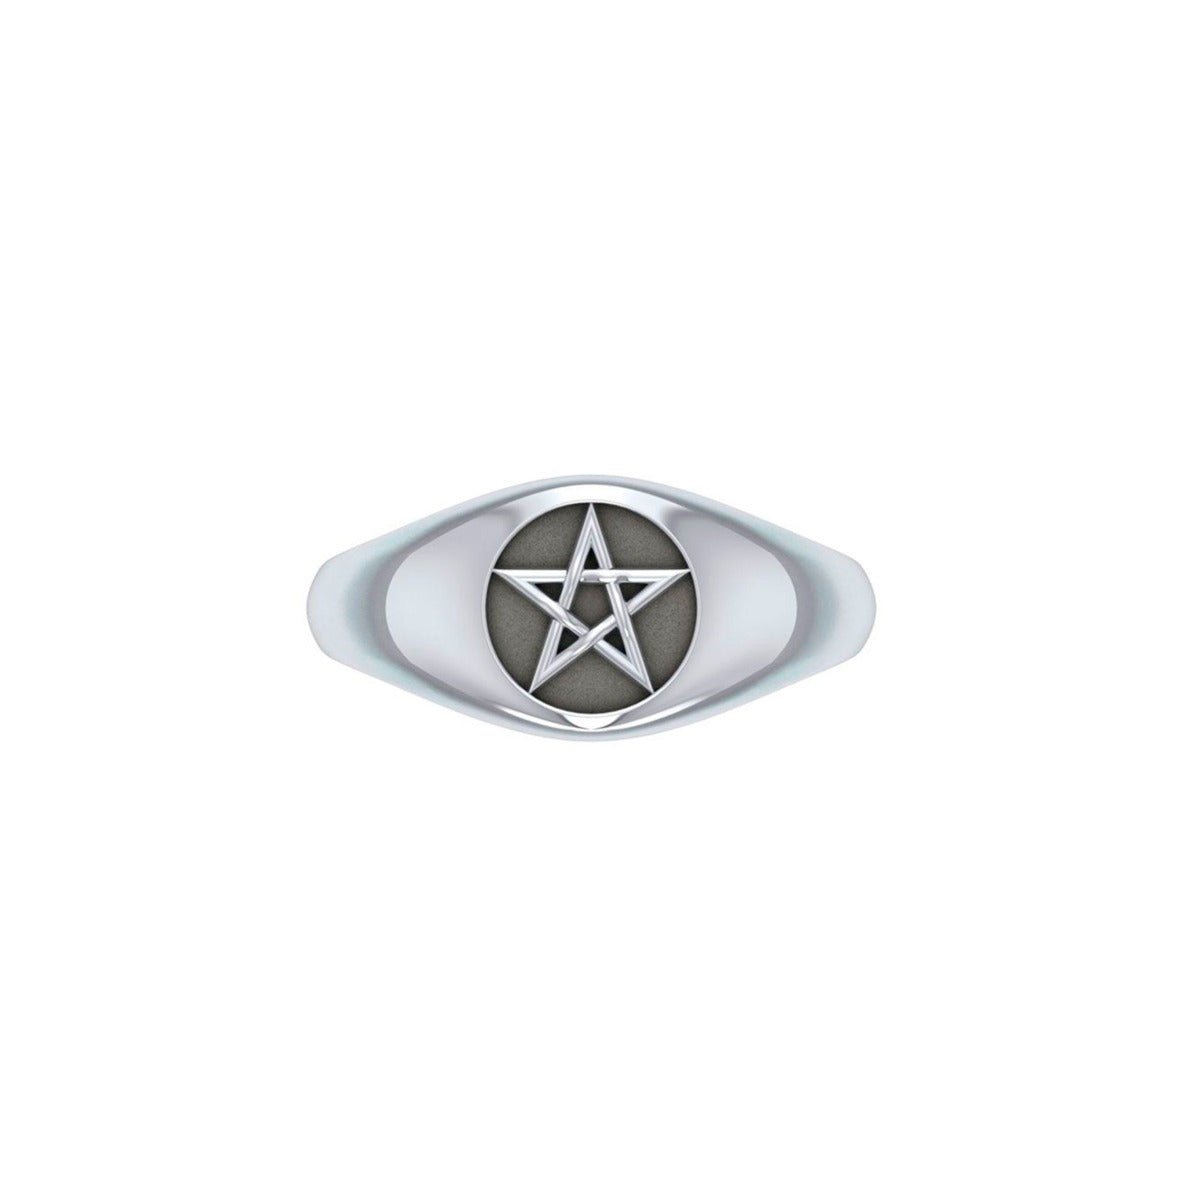 Pentacle Ring - 13 Moons